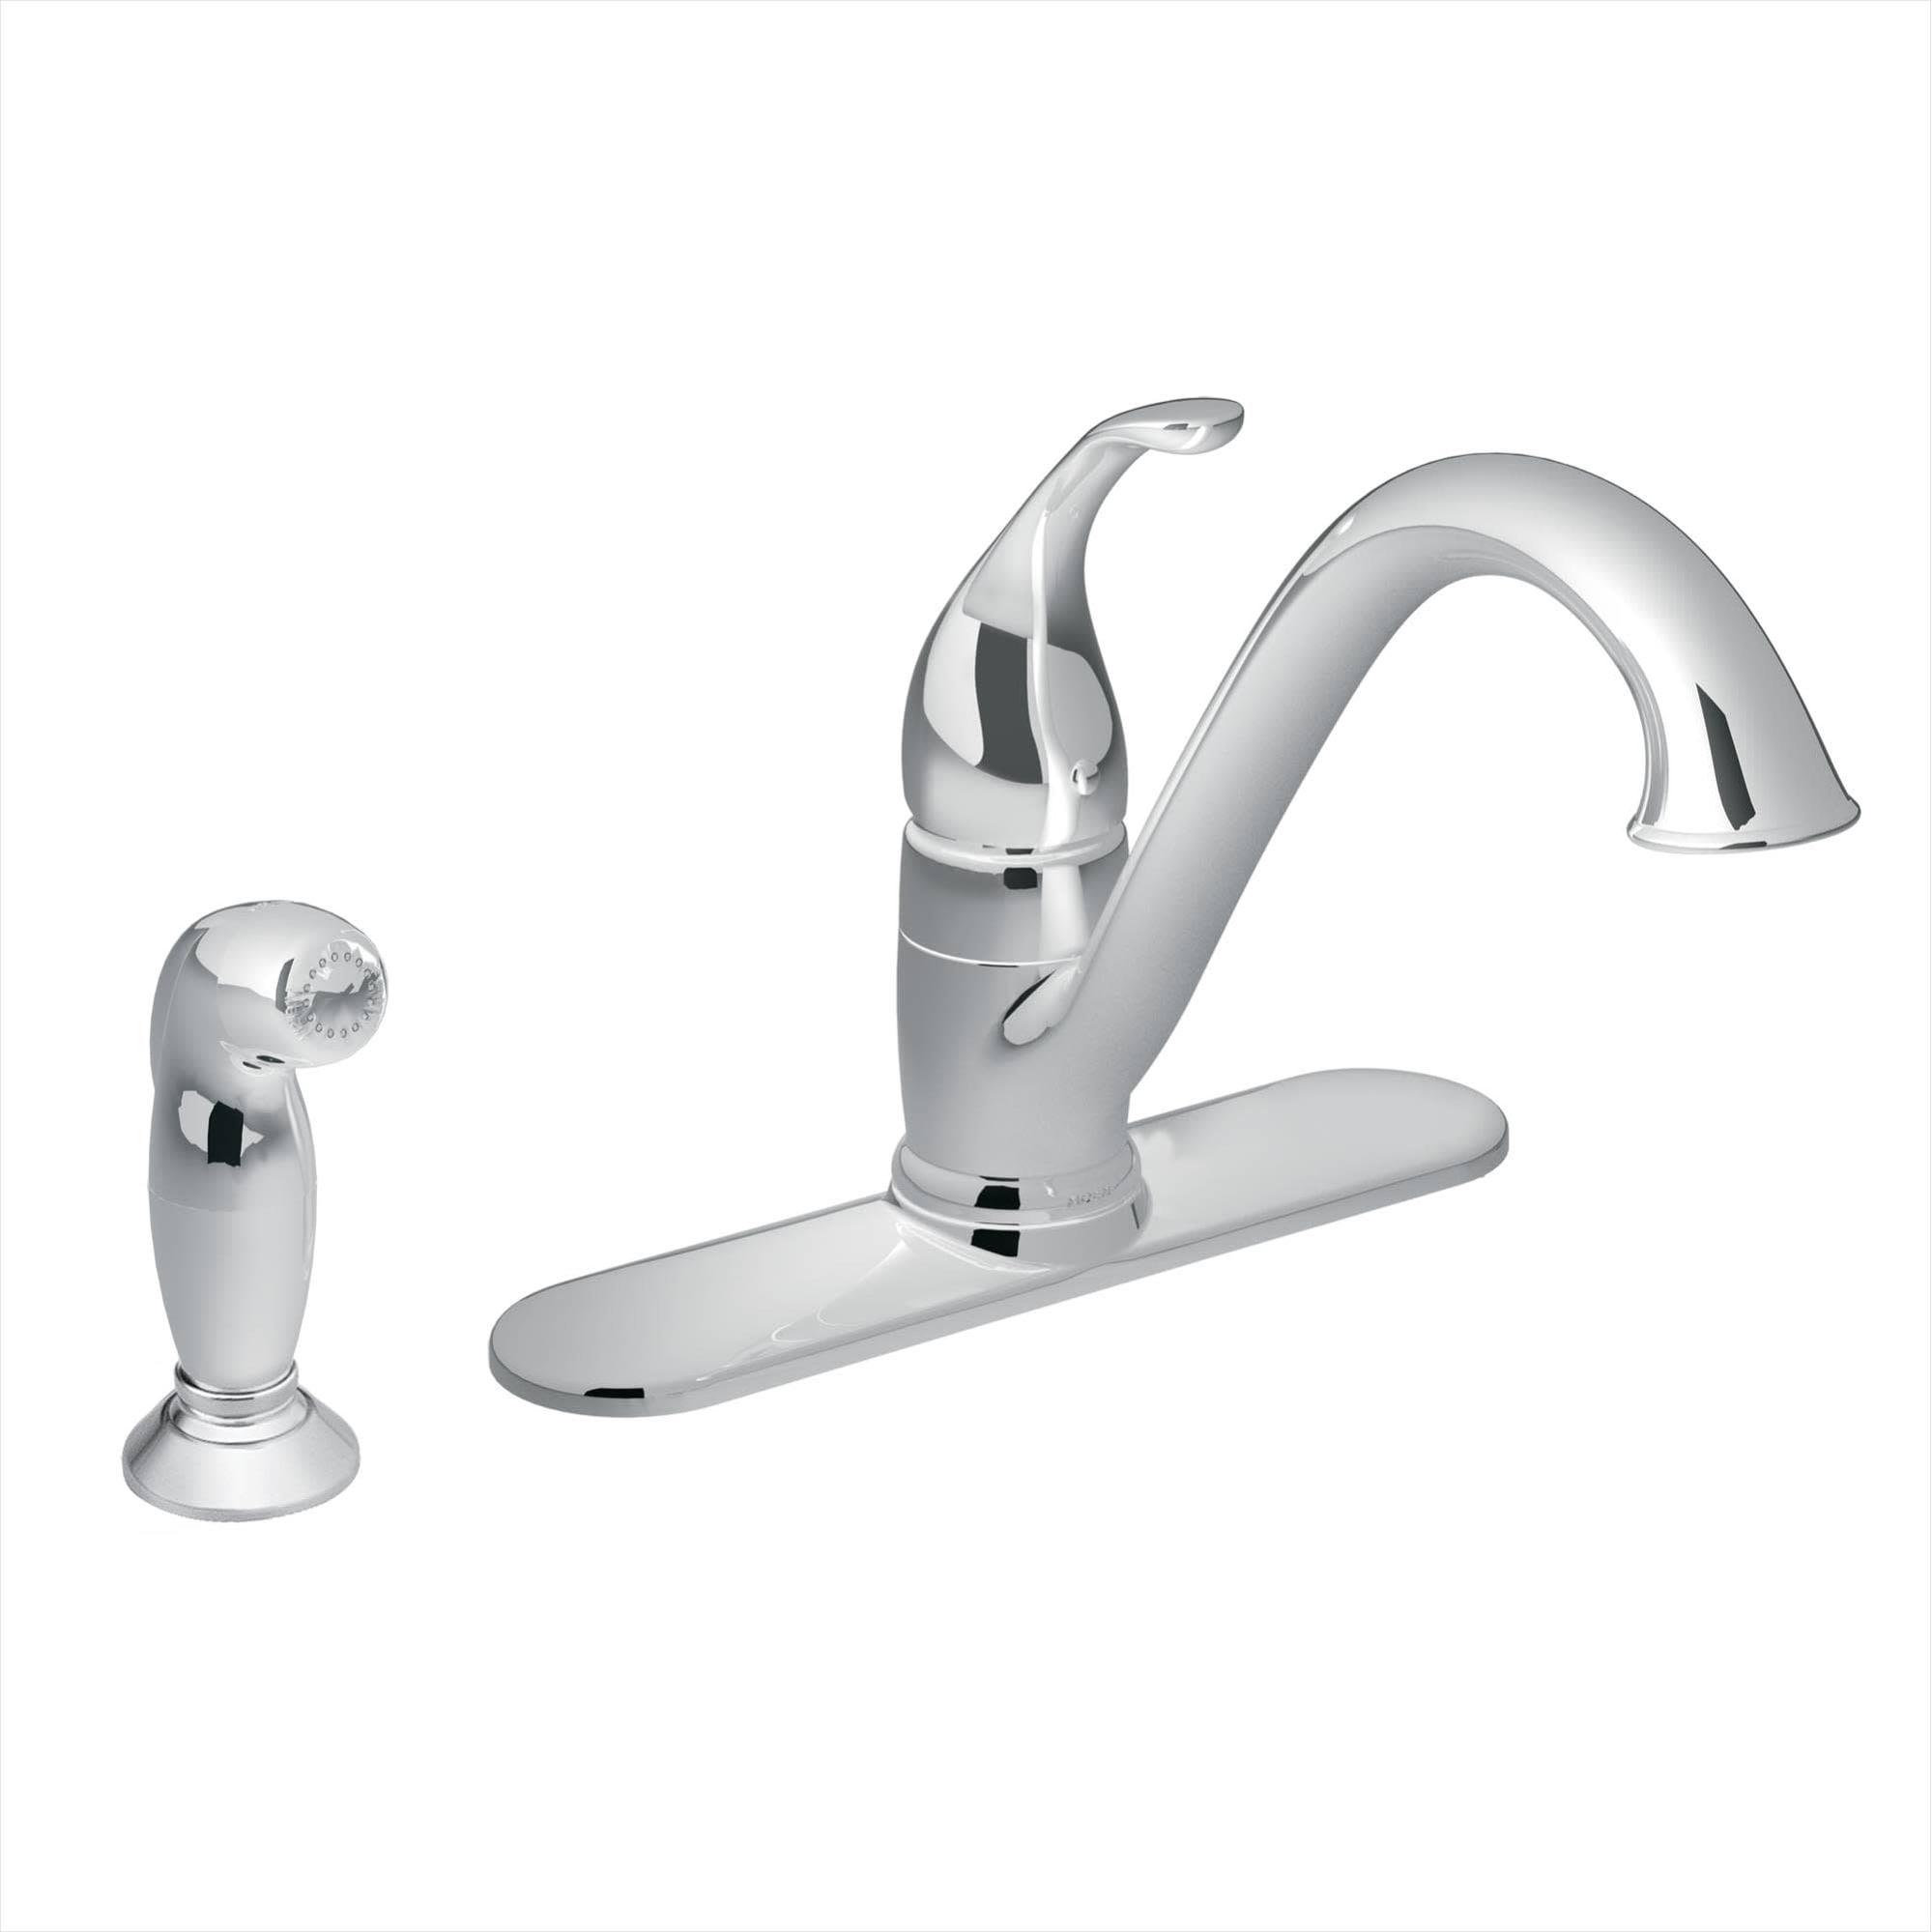 Shop Black Friday Deals On Moen 67840 Camerist High Arc Kitchen Faucet With Sidespray Chrome Overstock 16296274